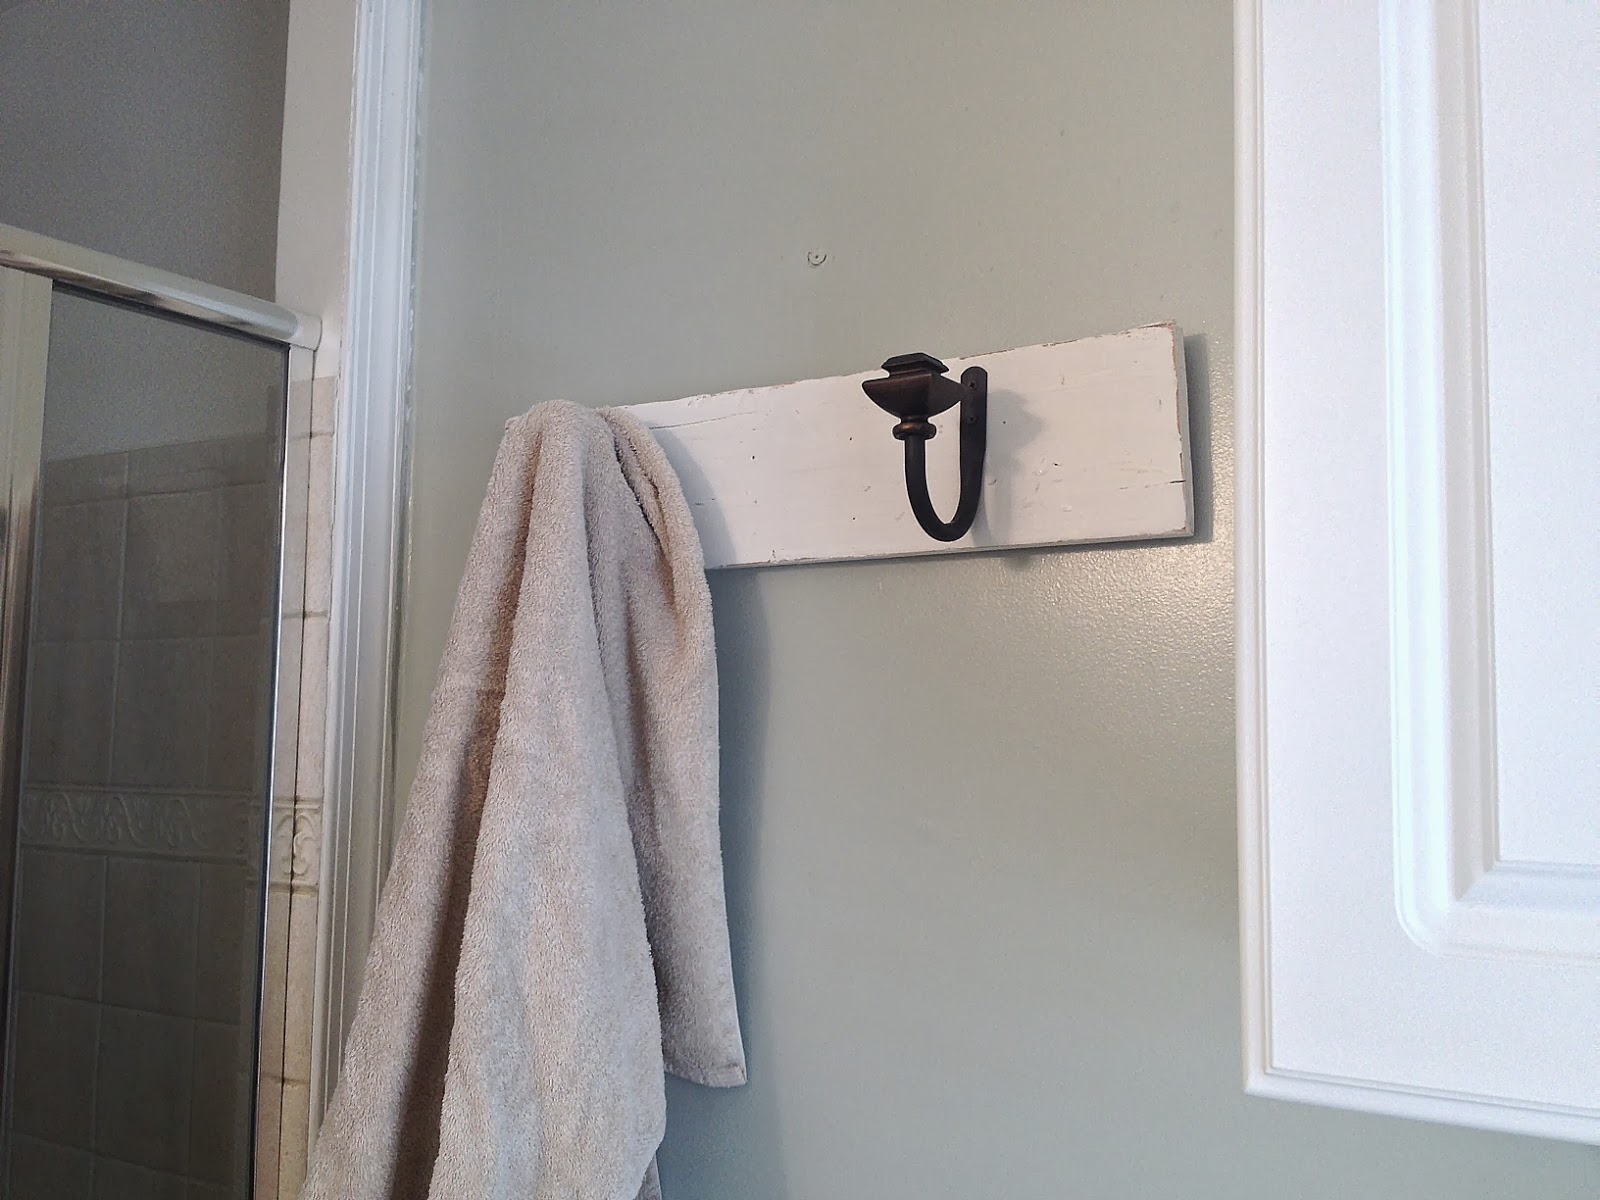 Two It Yourself: DIY Towel Hooks from Old Curtain Tie Backs (15 Minute  Project)